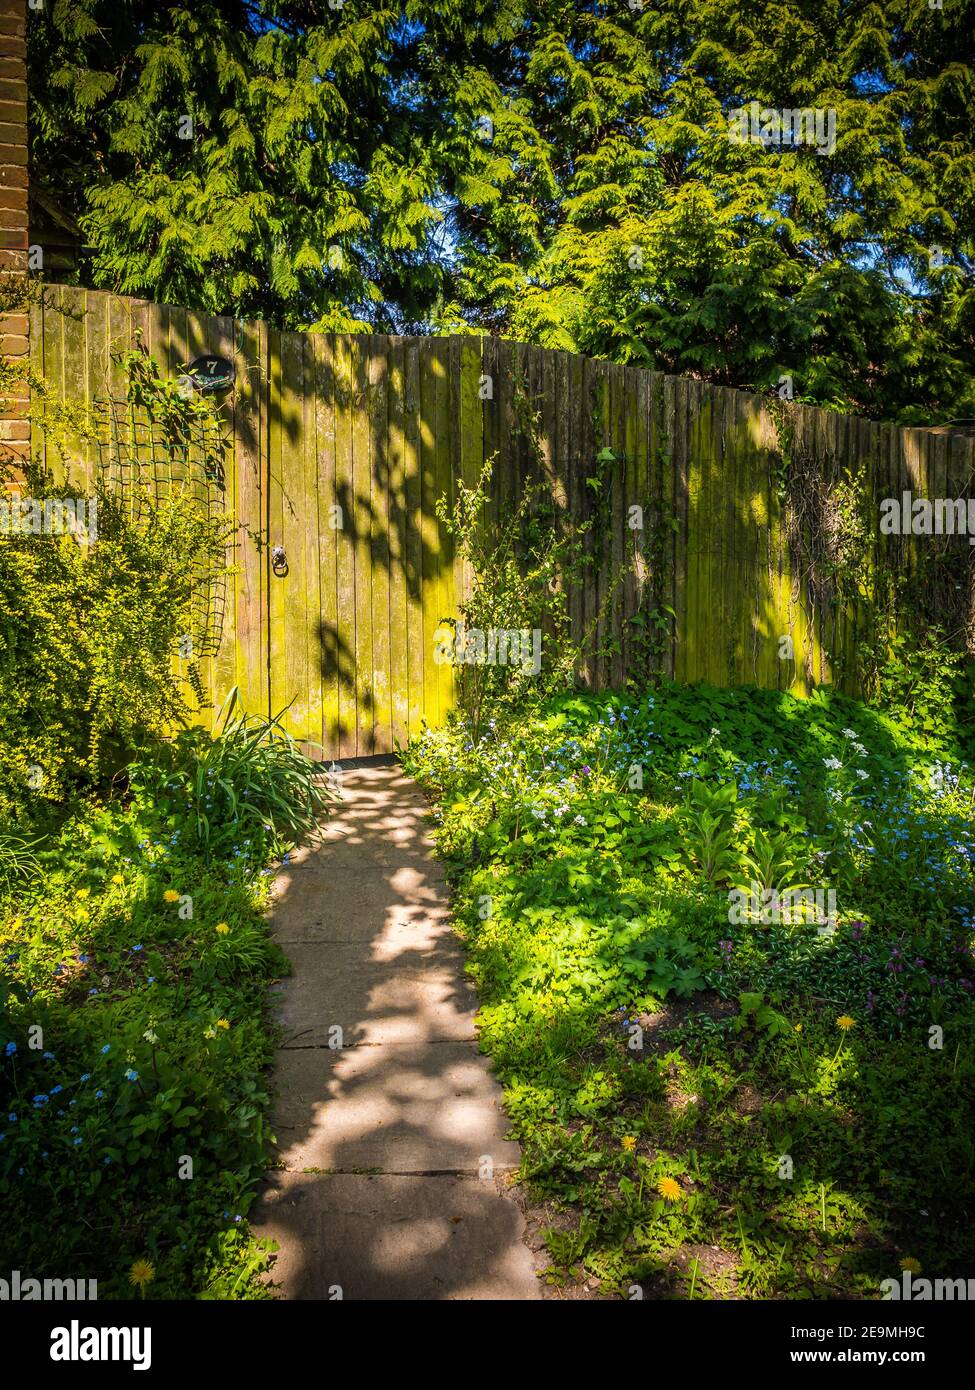 The path and gate provide a striking entrance to number 7 Stock Photo